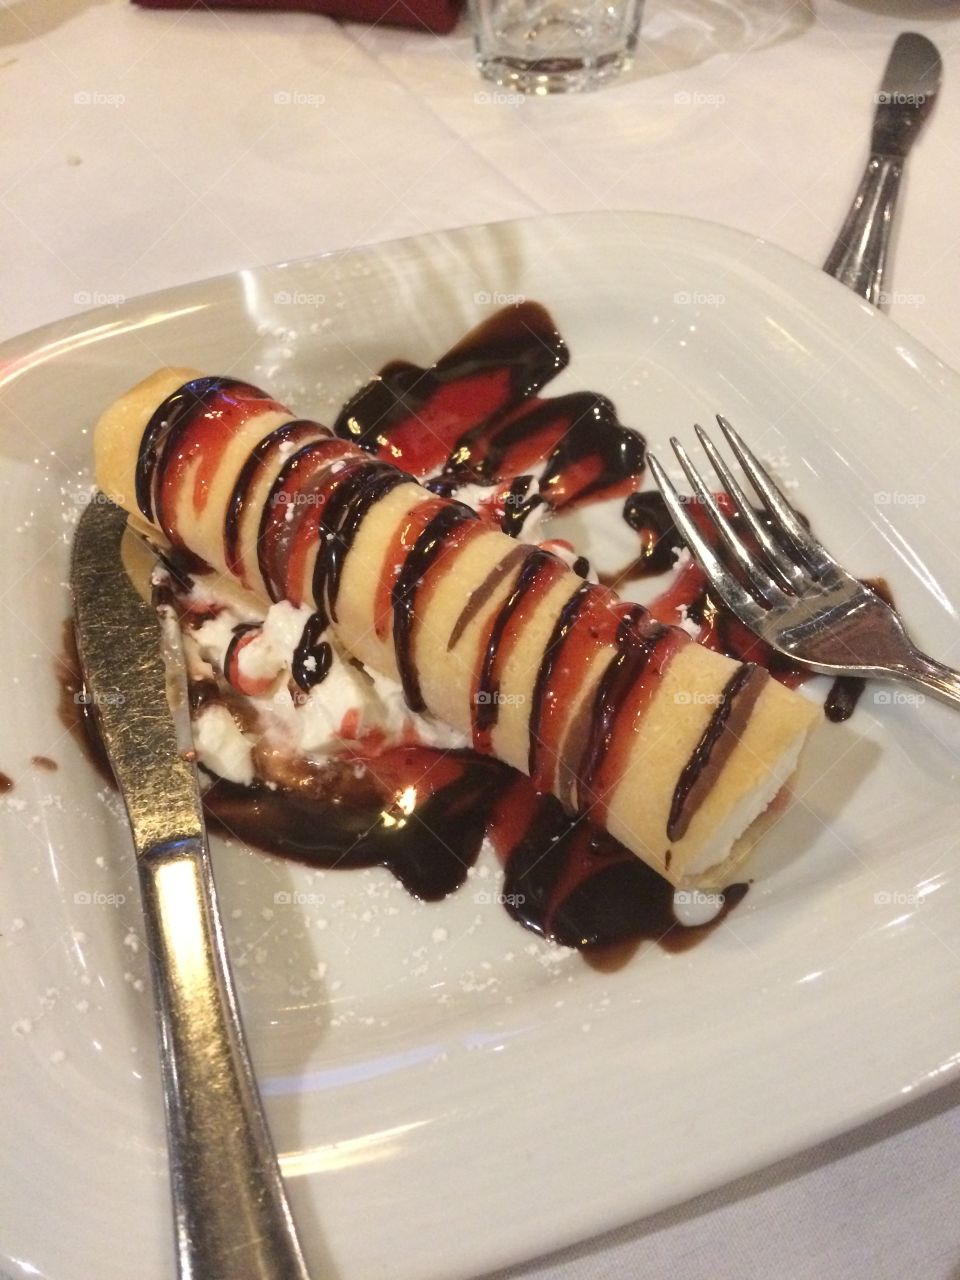 Crepe stuffed with vanilla ice cream drizzled with chocolate and strawberry sauce. A dessert lovers dream. 